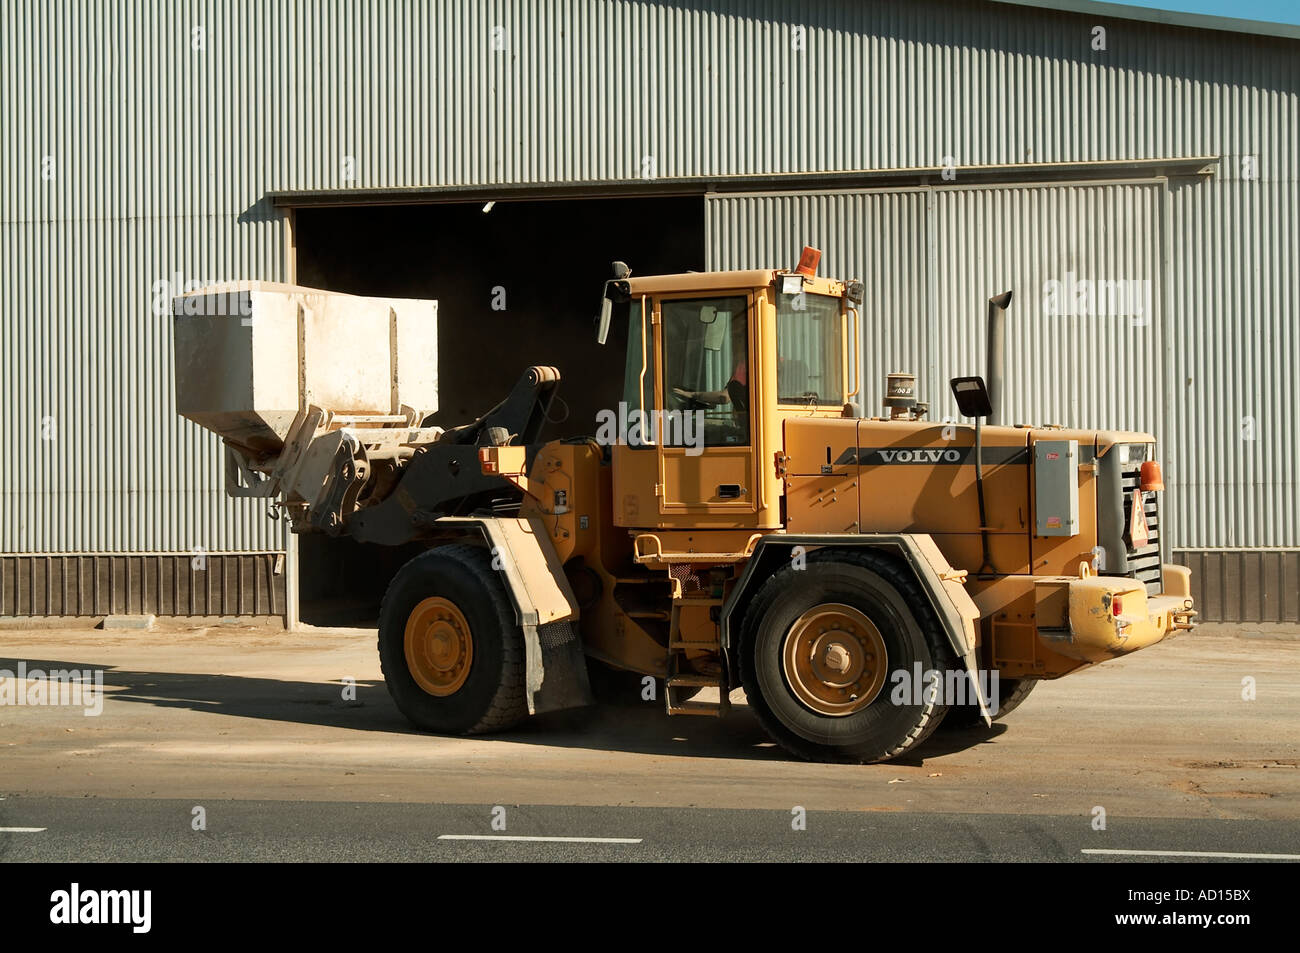 volvo, digger, earth, mover, earthmover, heavy, industry, industrial, scoop, bucket, diesel, yellow, big, lift, Stock Photo